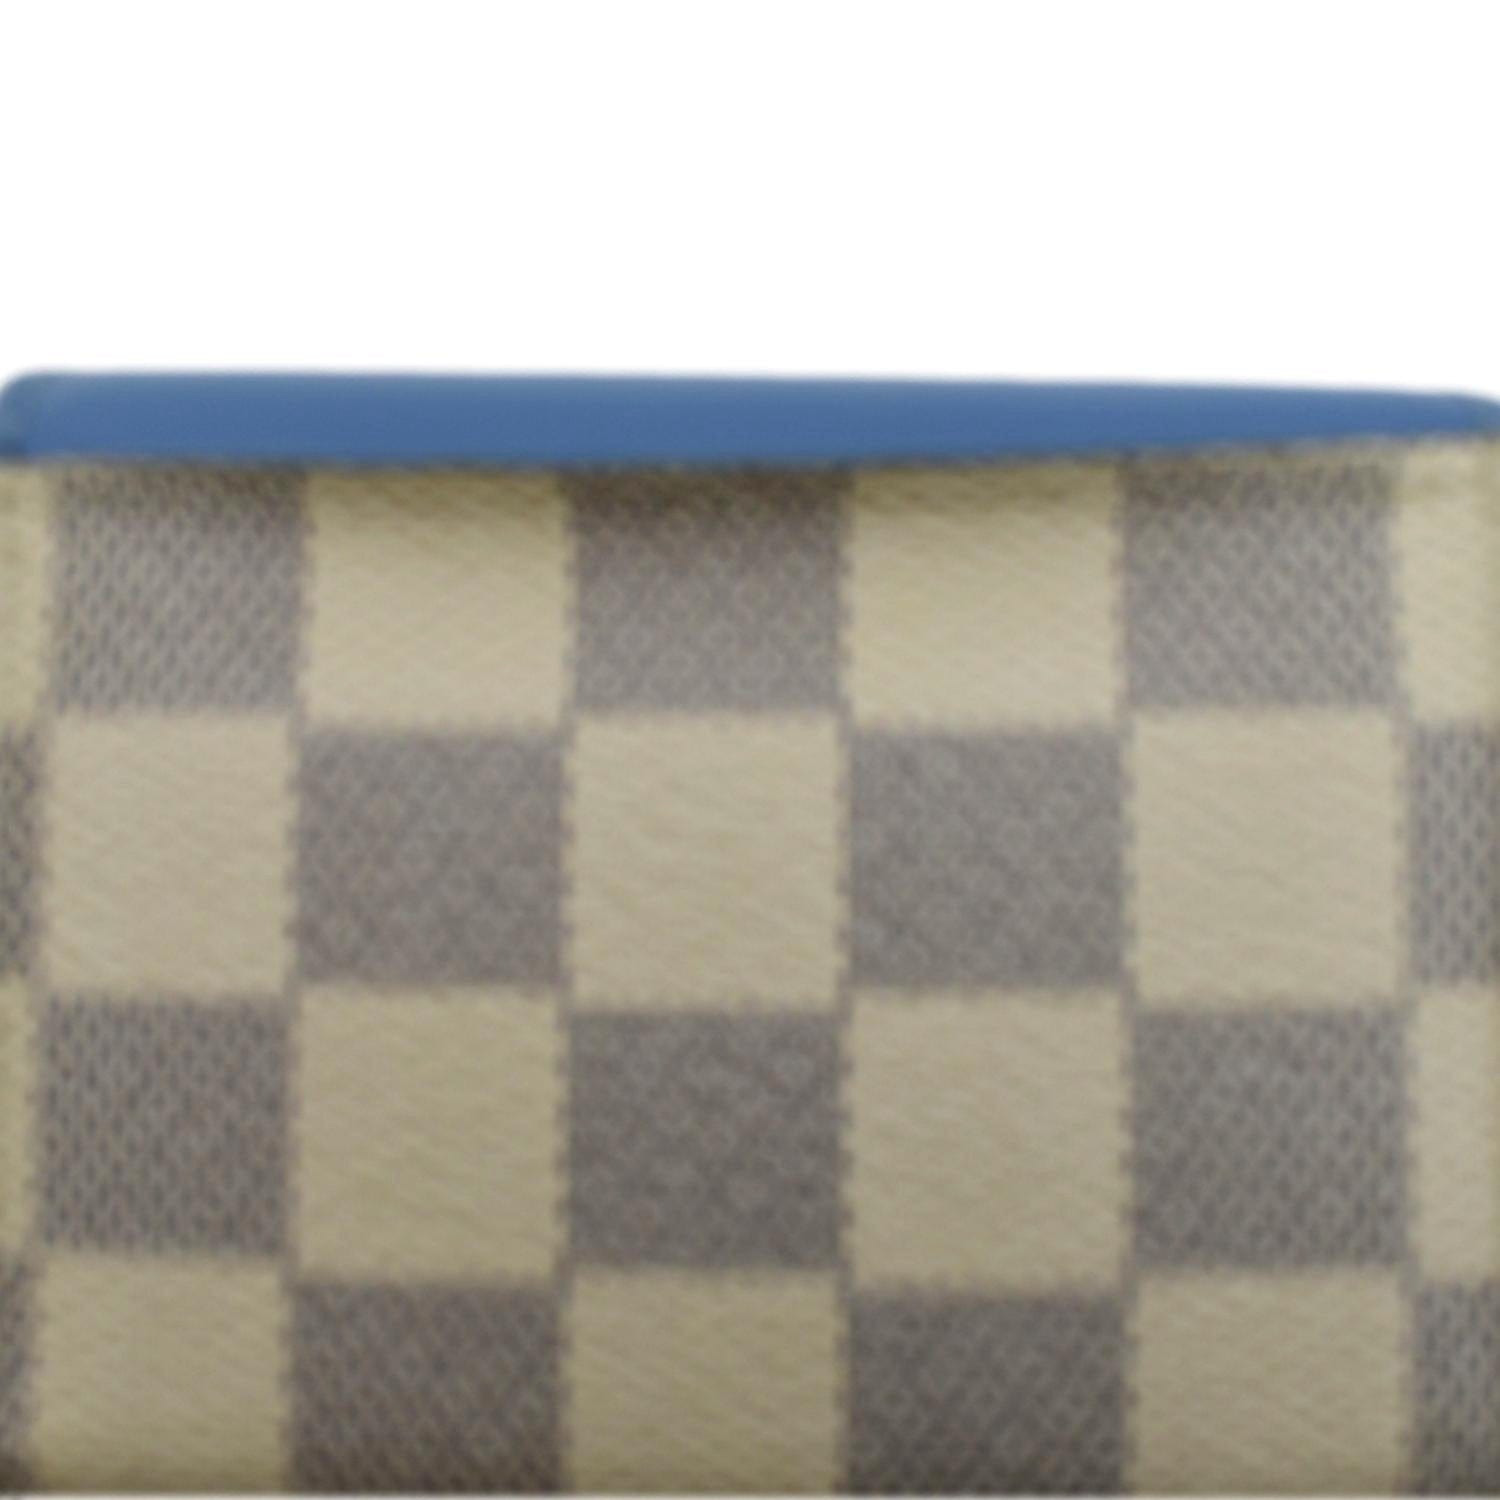 blue and white louis vuittons wallet